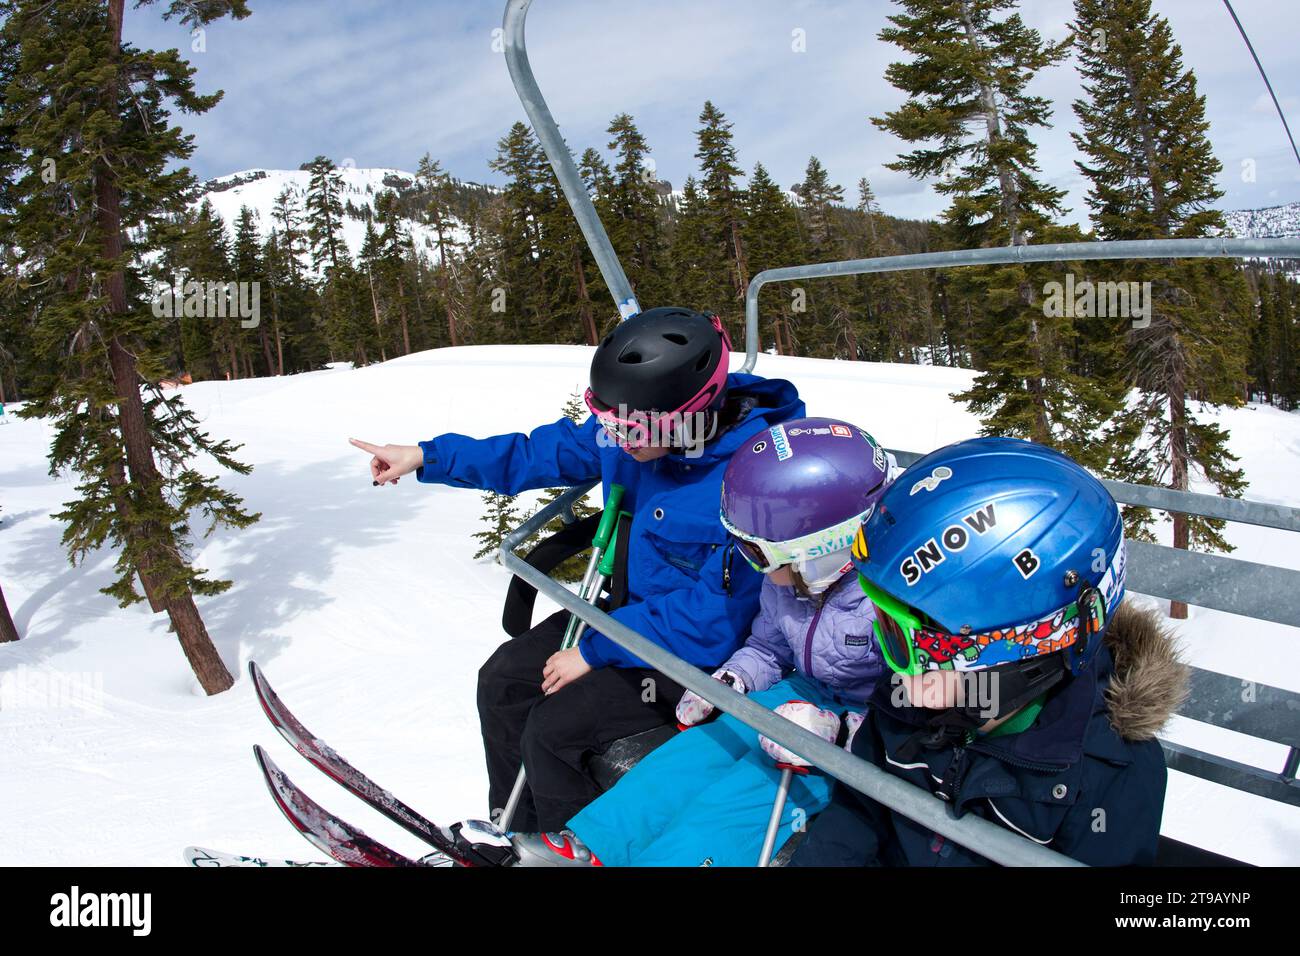 Ski instructor with two young skiers on a chairlift. Stock Photo